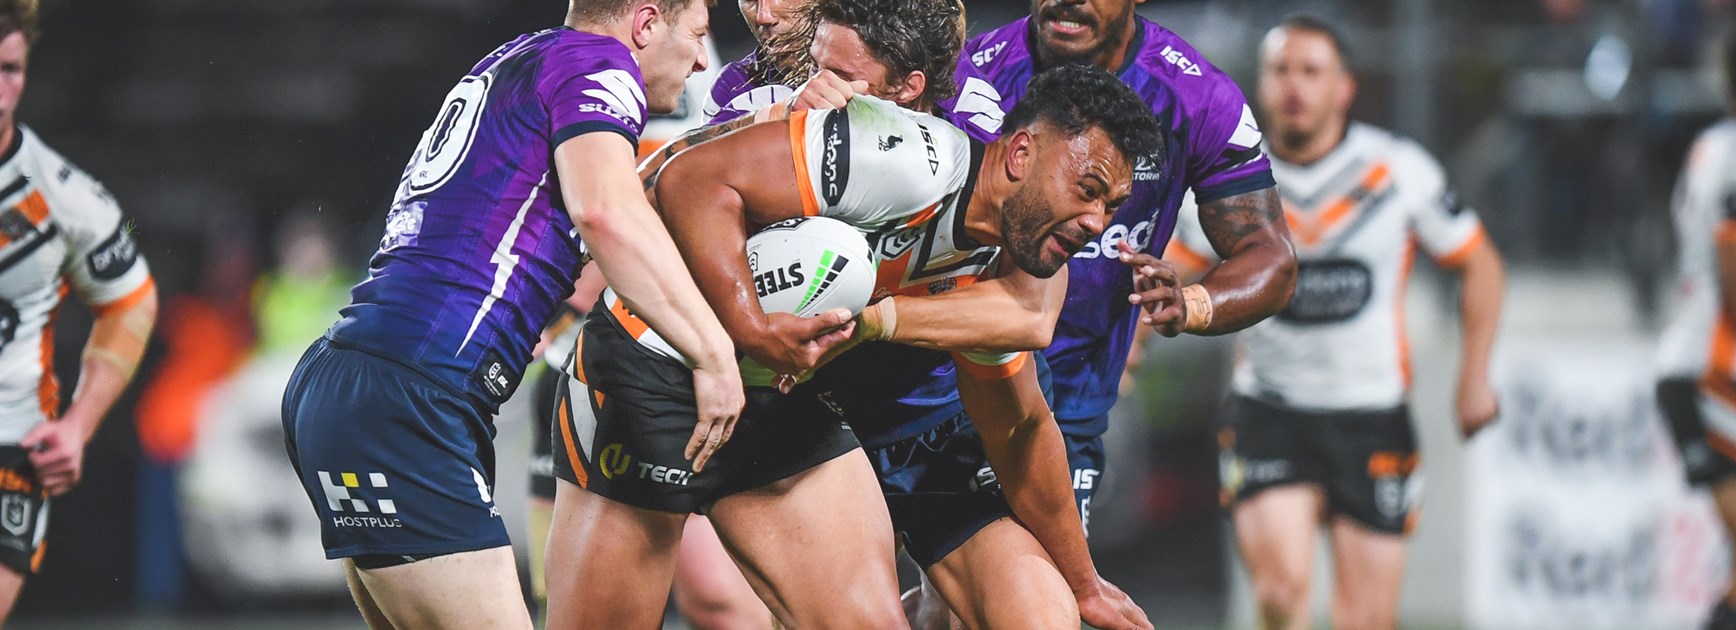 Wests Tigers Stat to Fix: Metres per carry